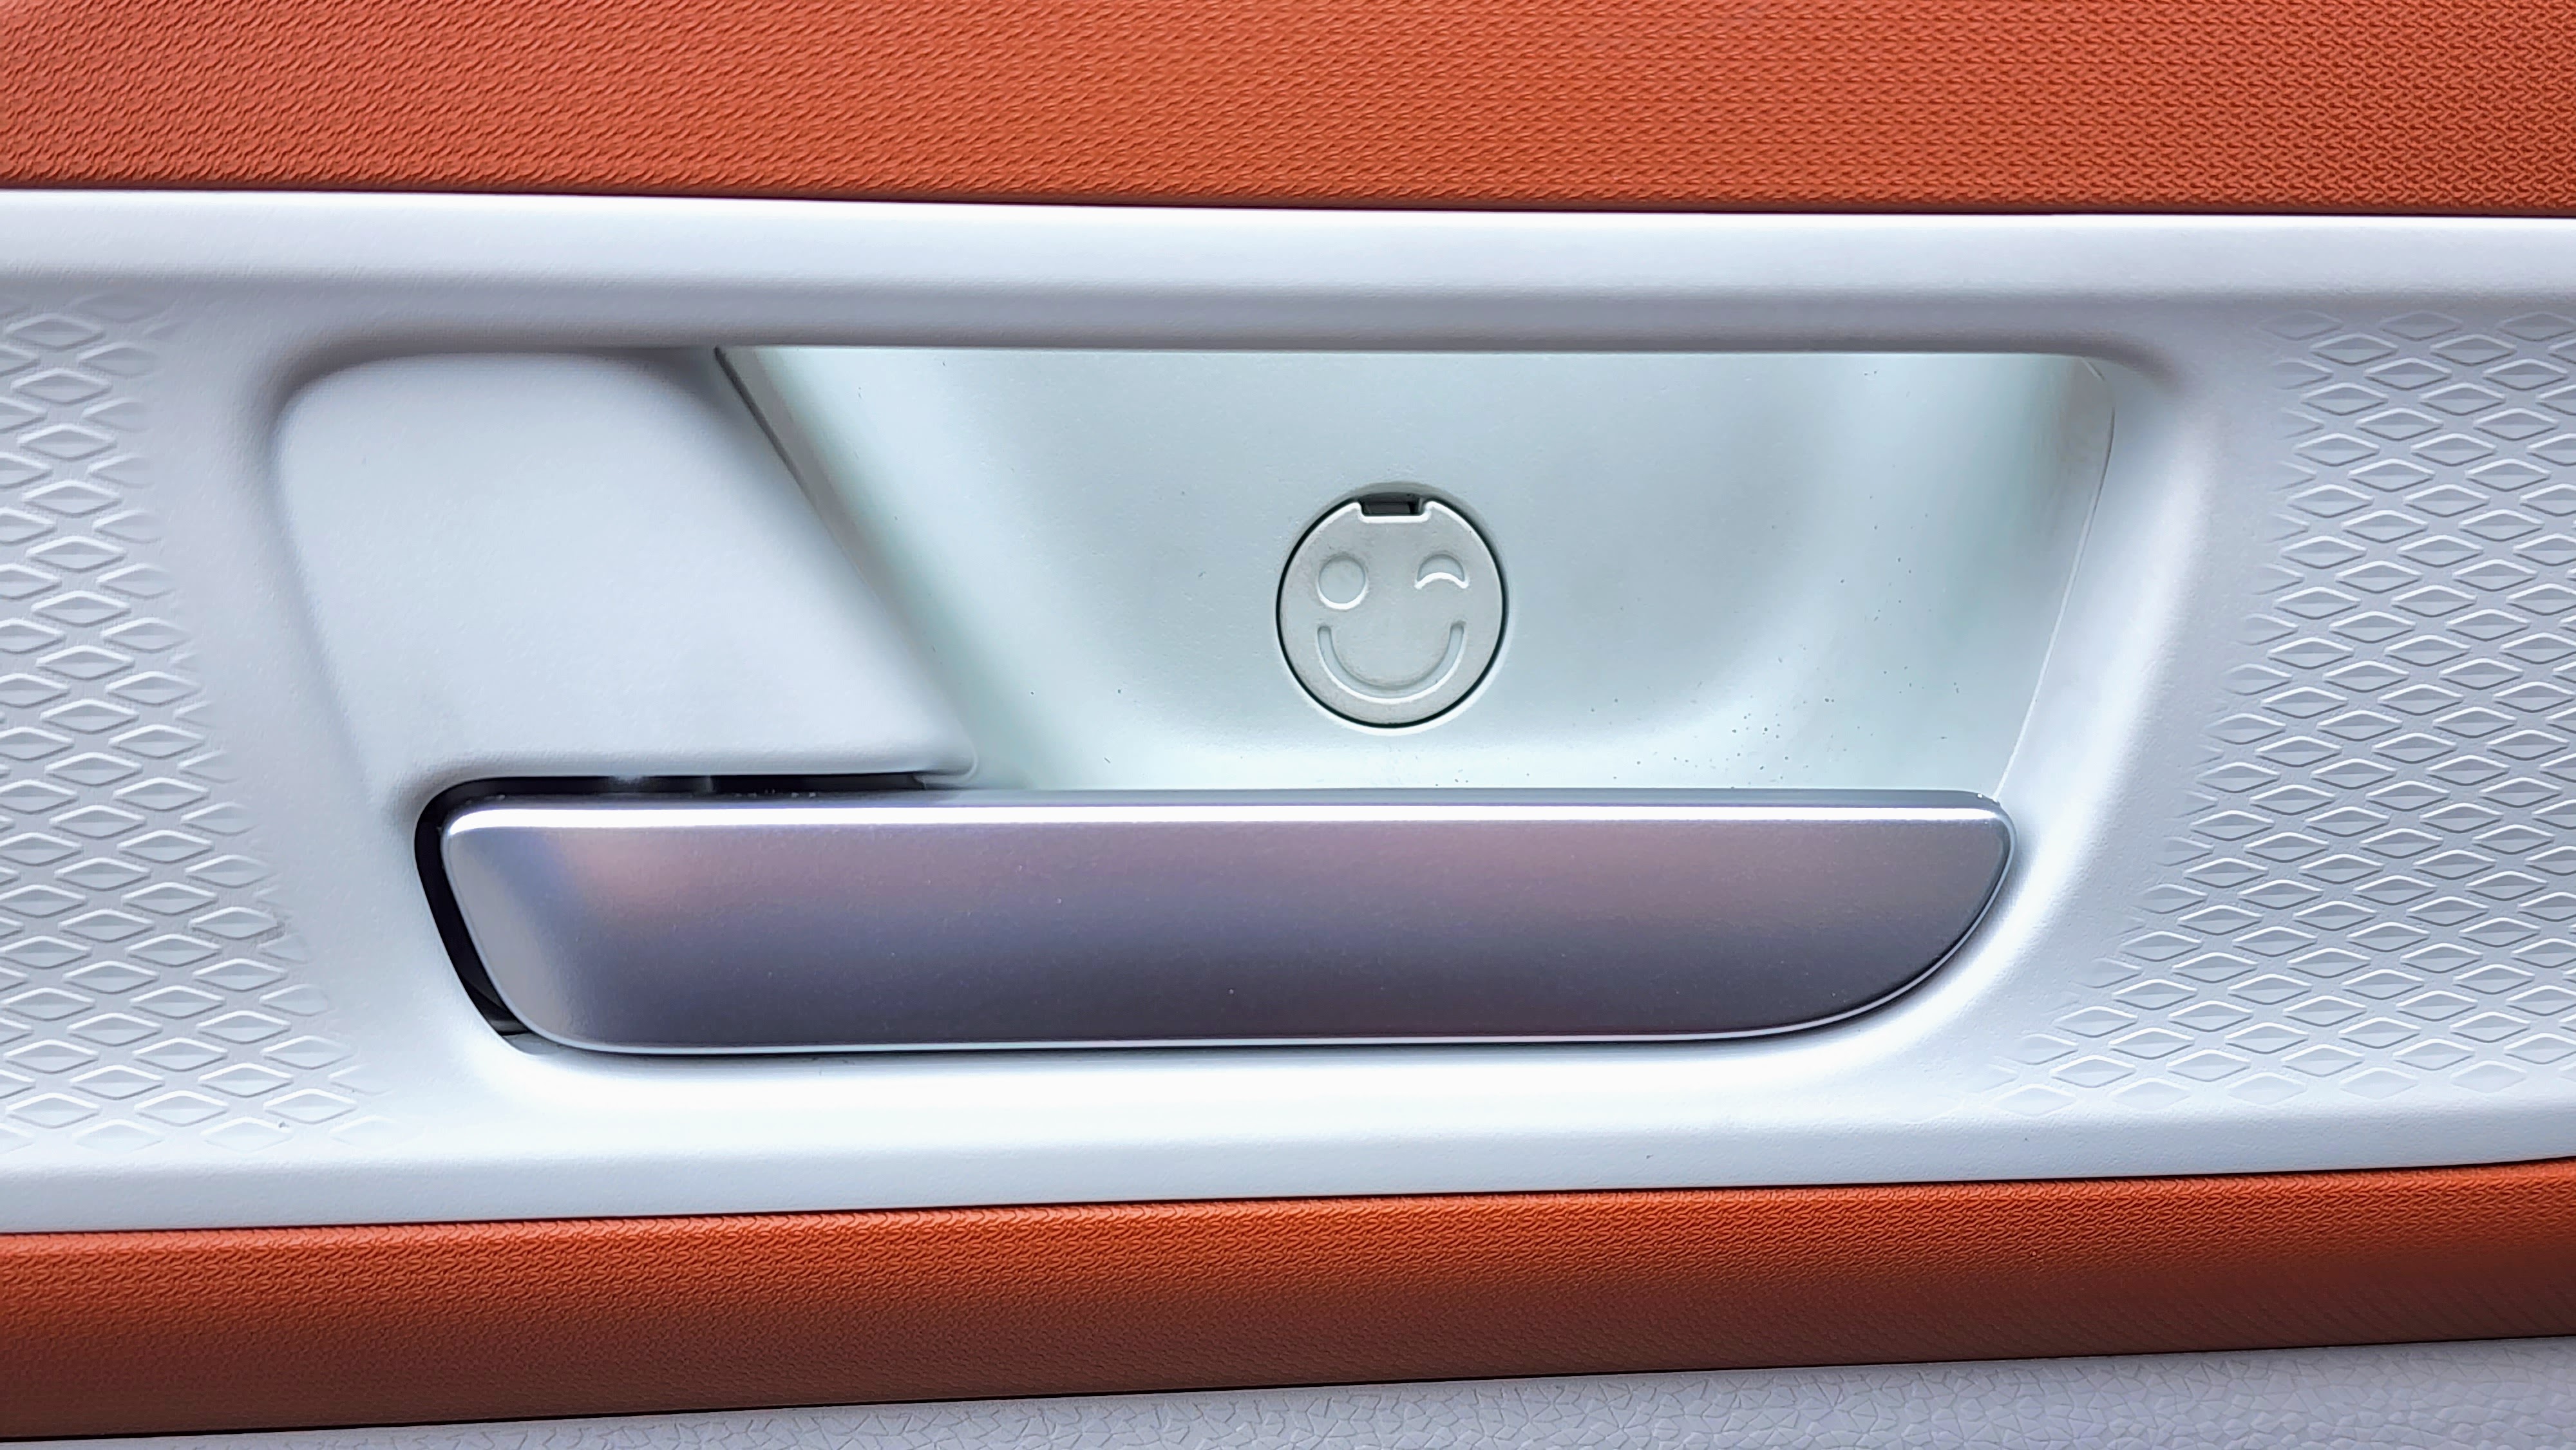 Close-up of the smiley face icon behind the internal door handles